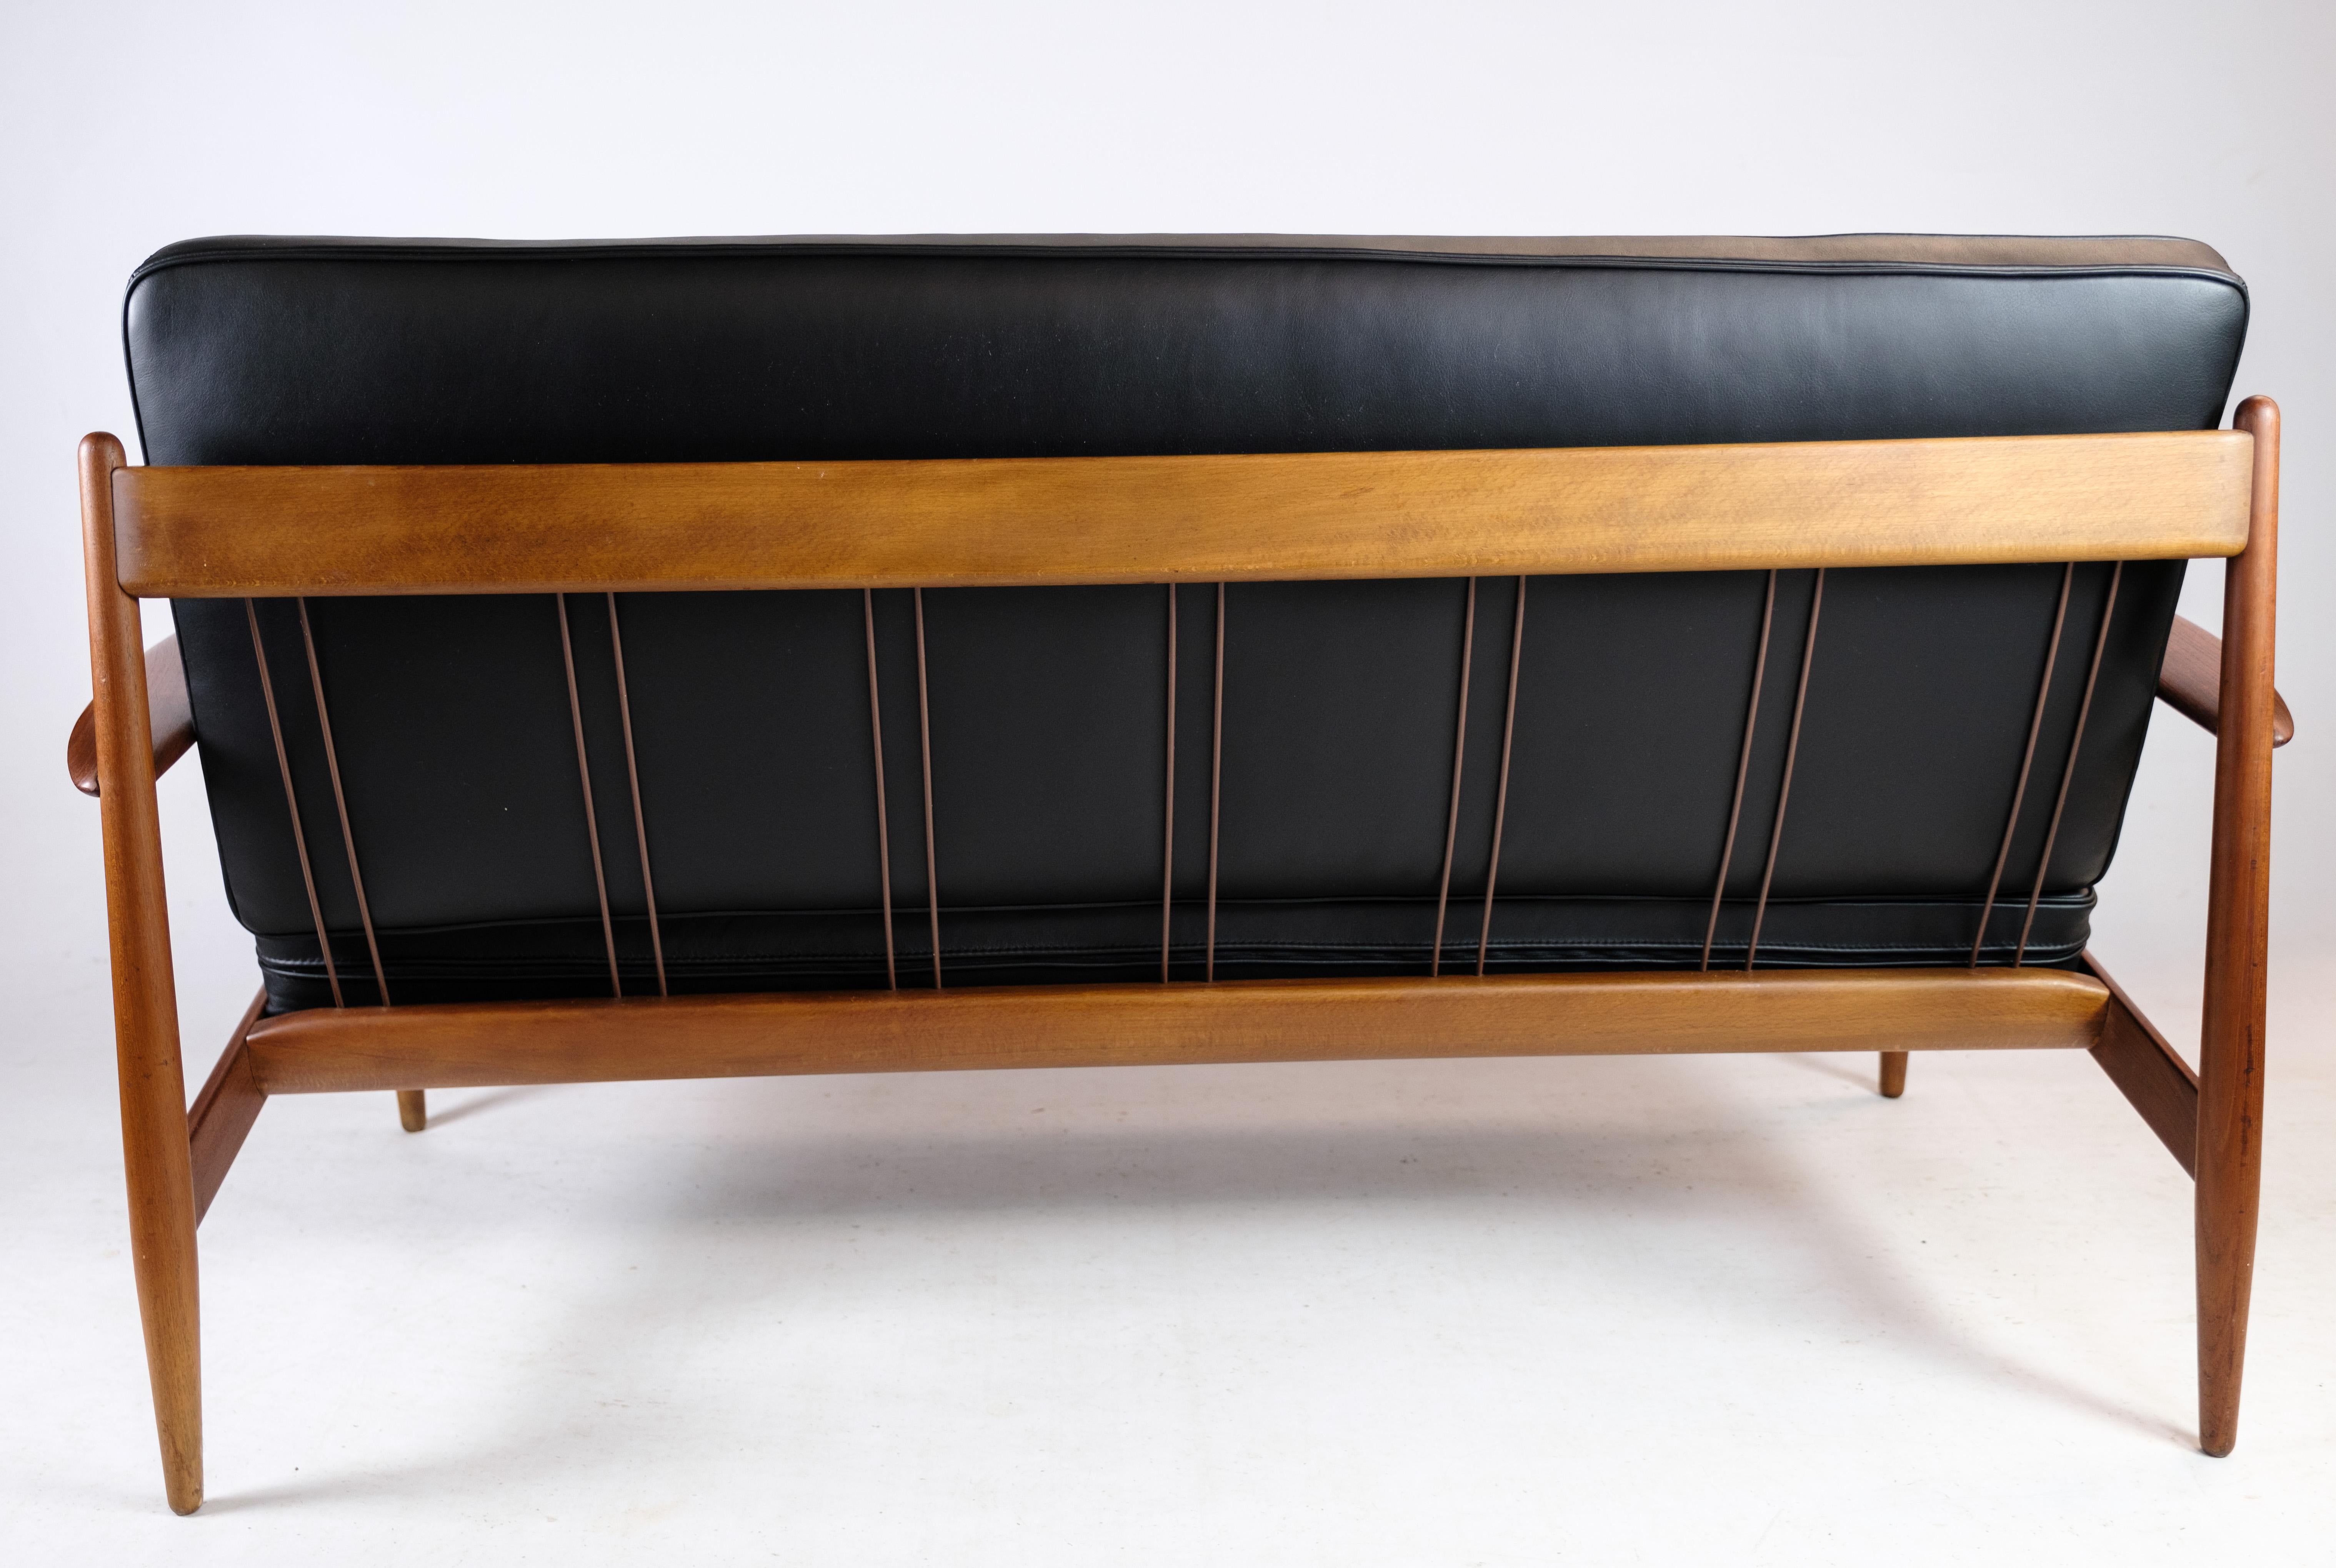 2 Seater Sofa Model 118 Made With a Teak Frame By Grete Jalk From 1960s For Sale 11